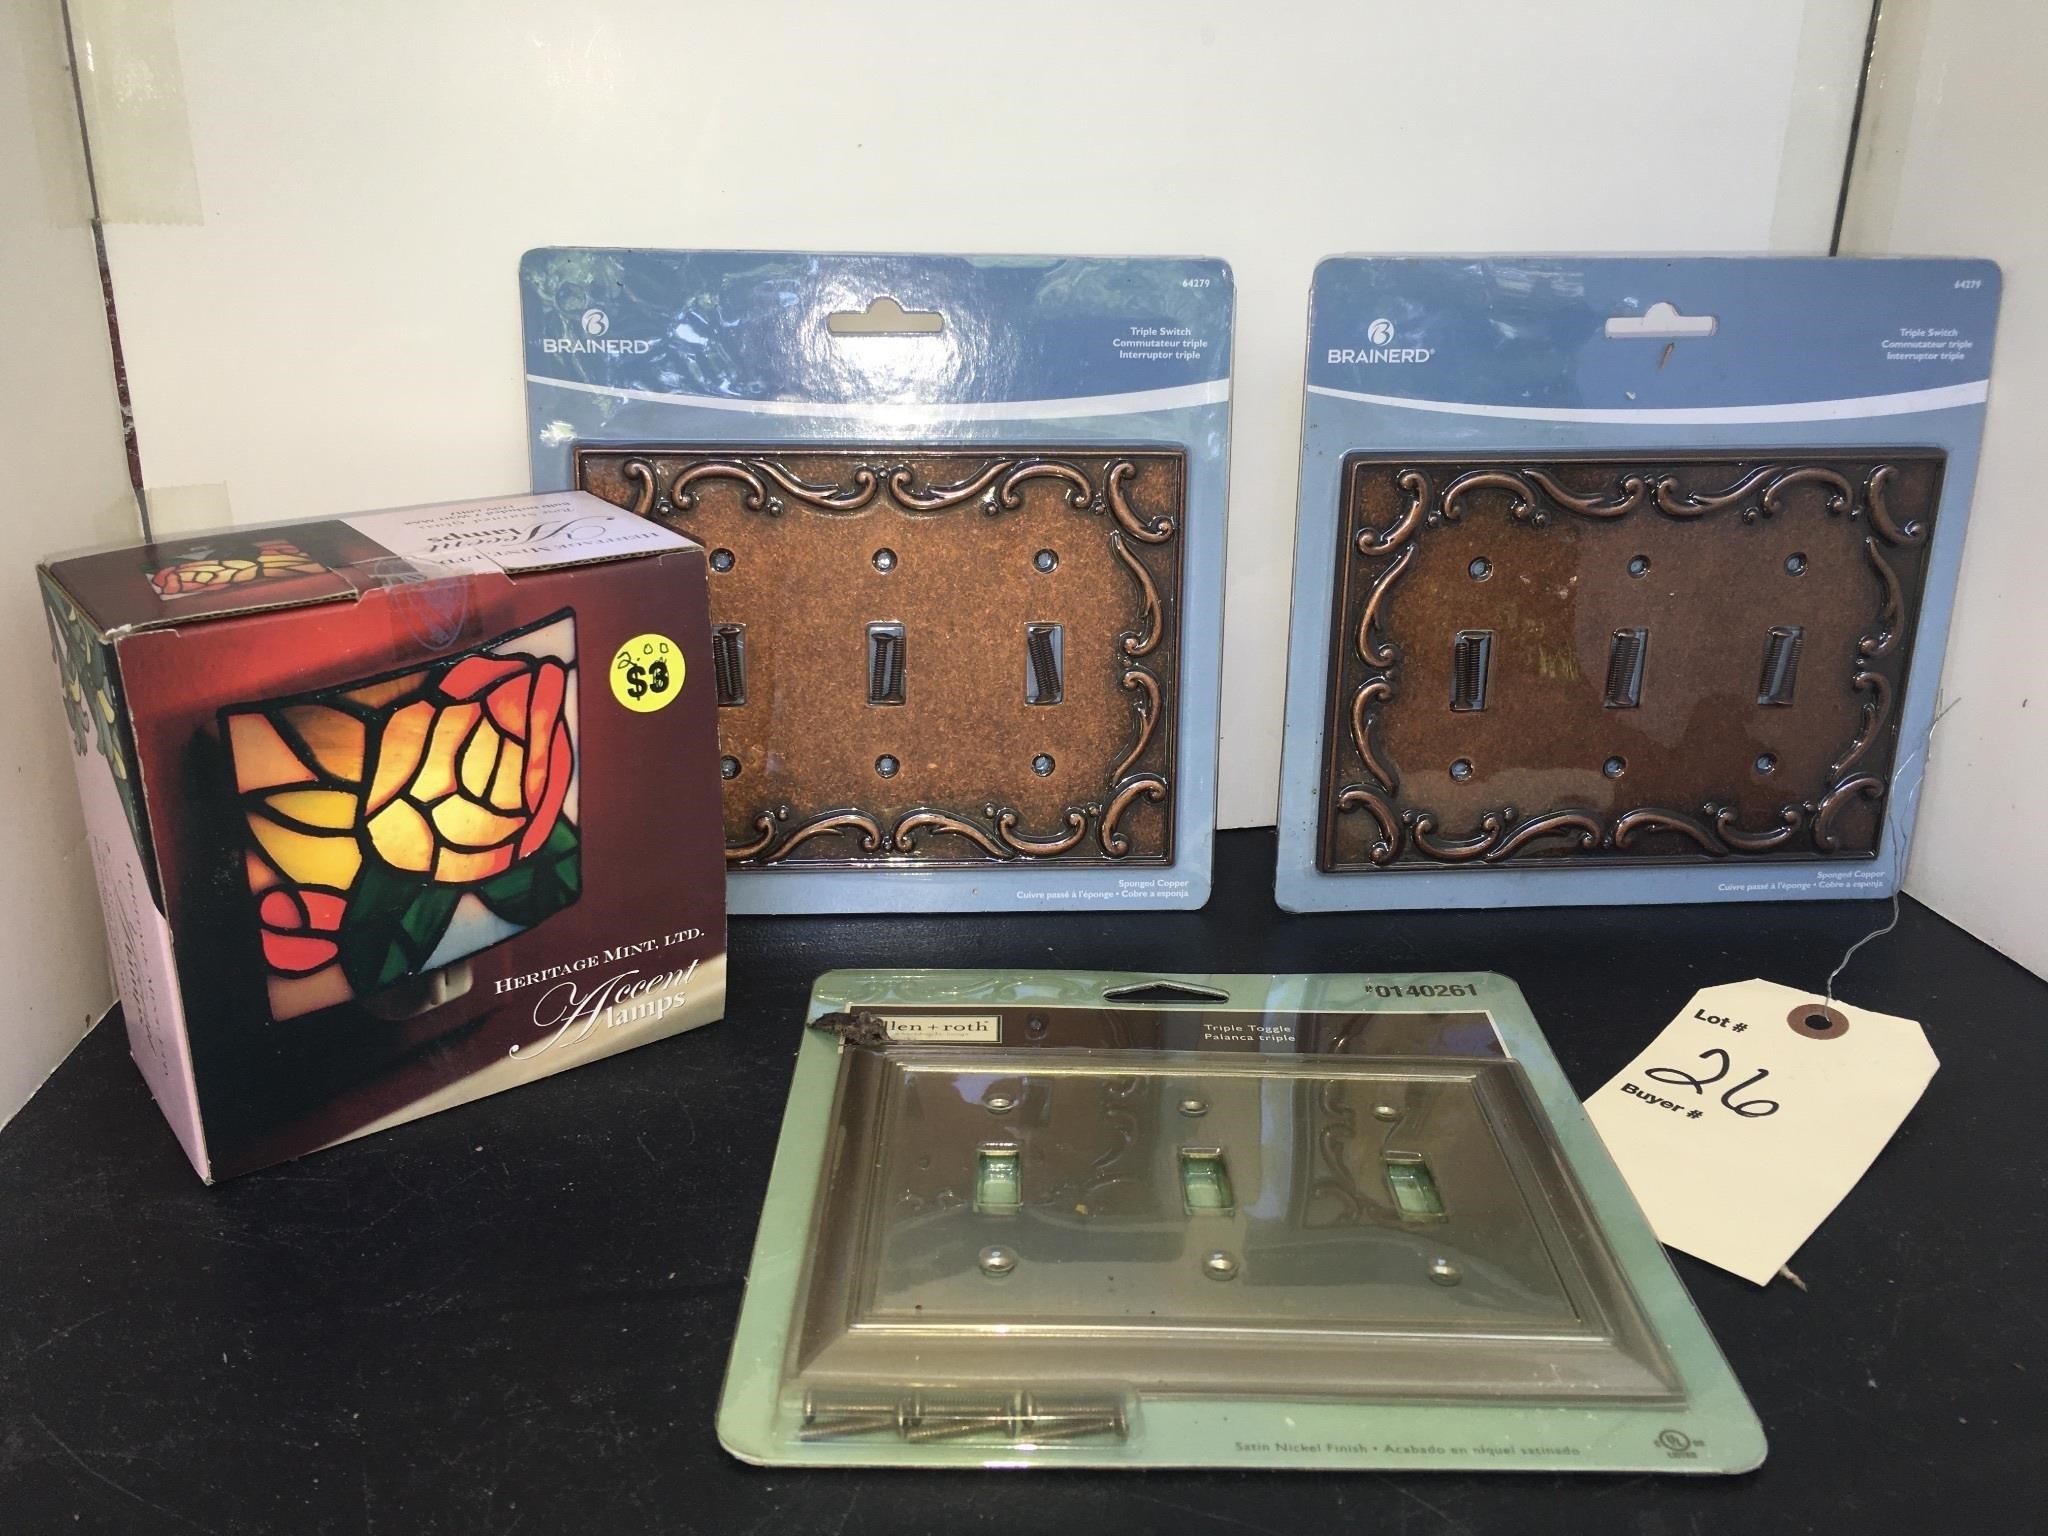 HUGE DOWNSIZING CONSIGNMENT SPRING AUCTION PART I